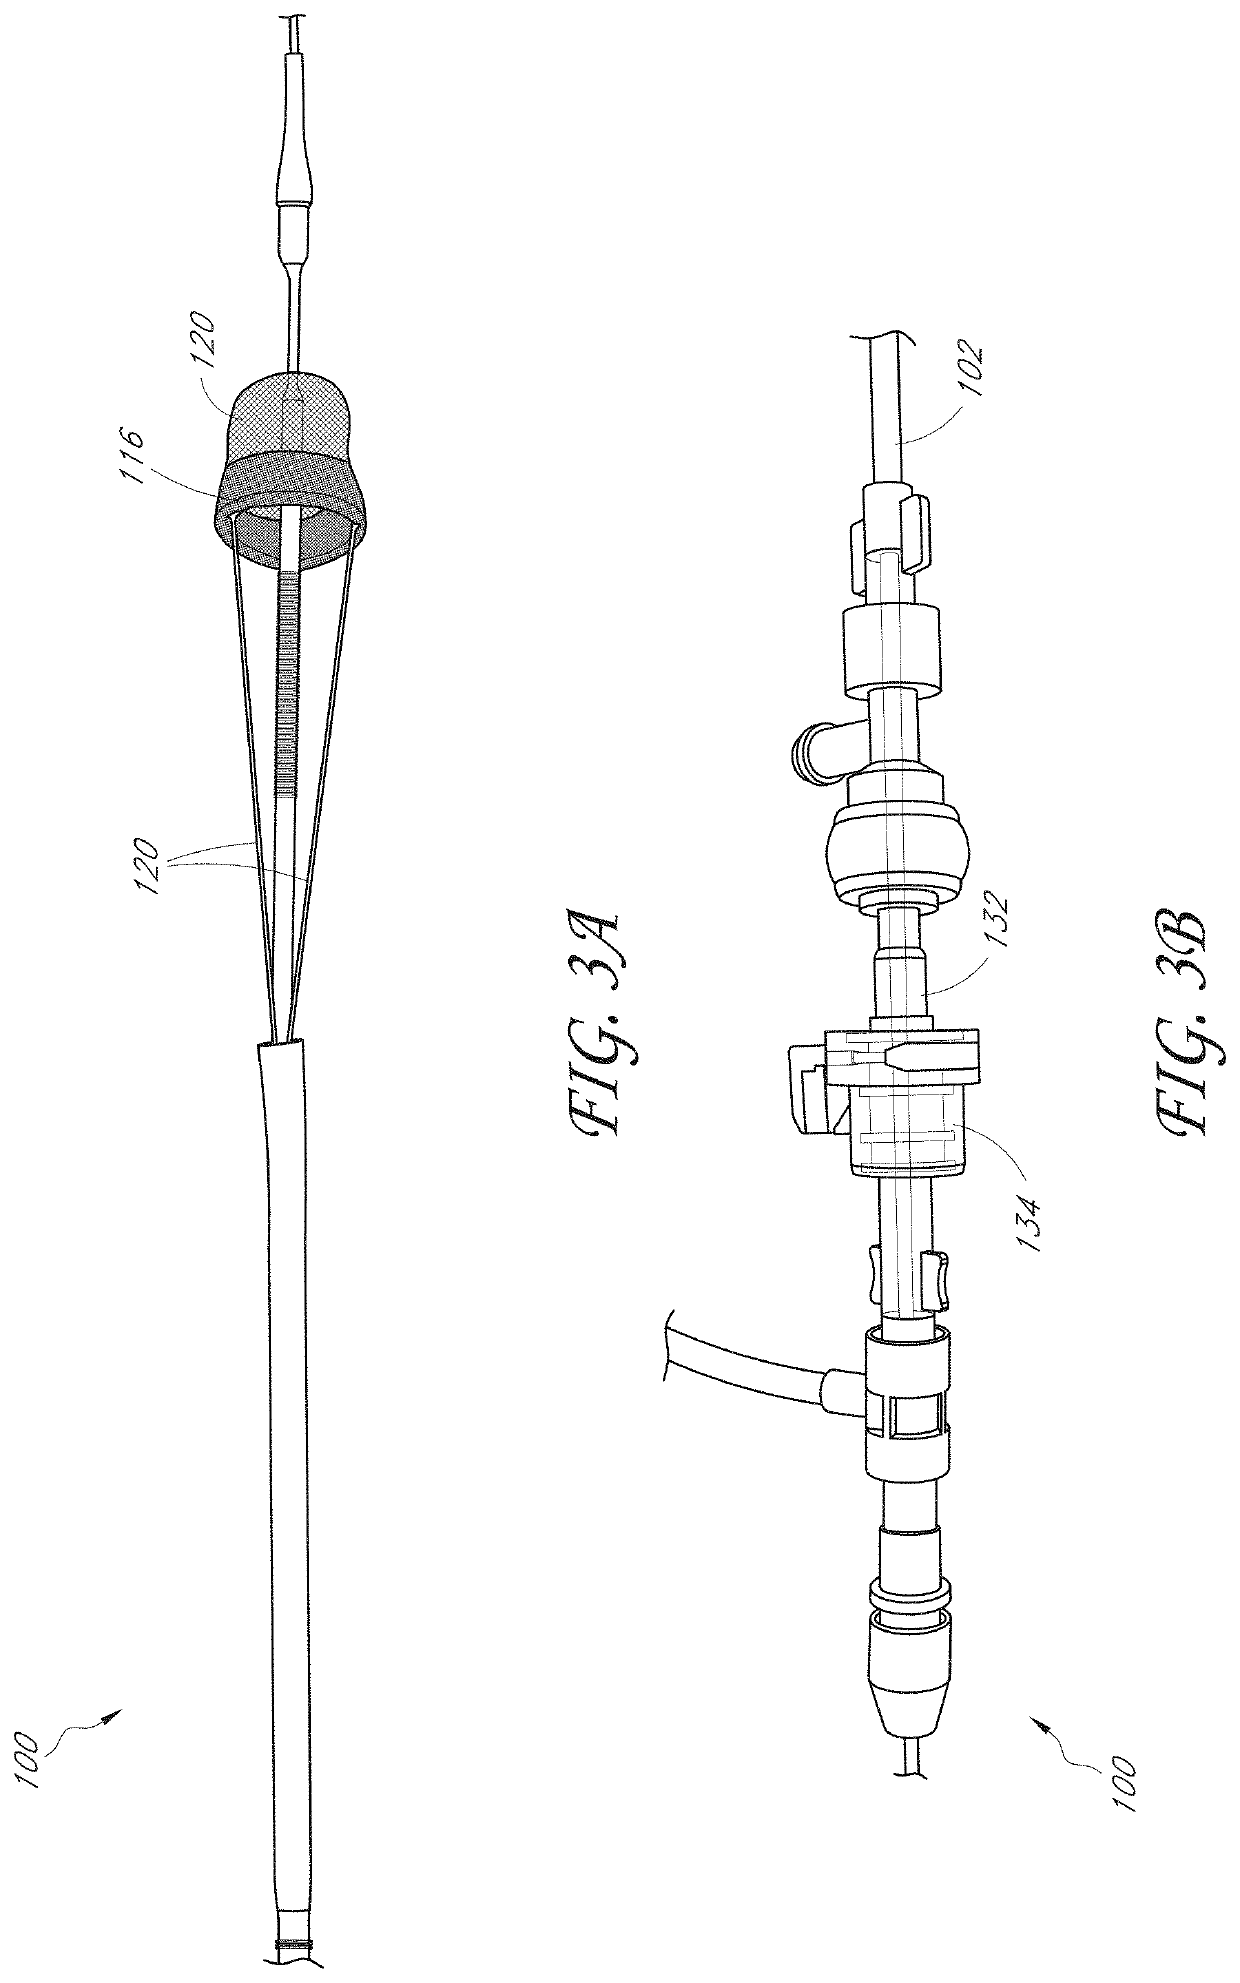 Axial lengthening thrombus capture system, tensioning system and expandable funnel catheter